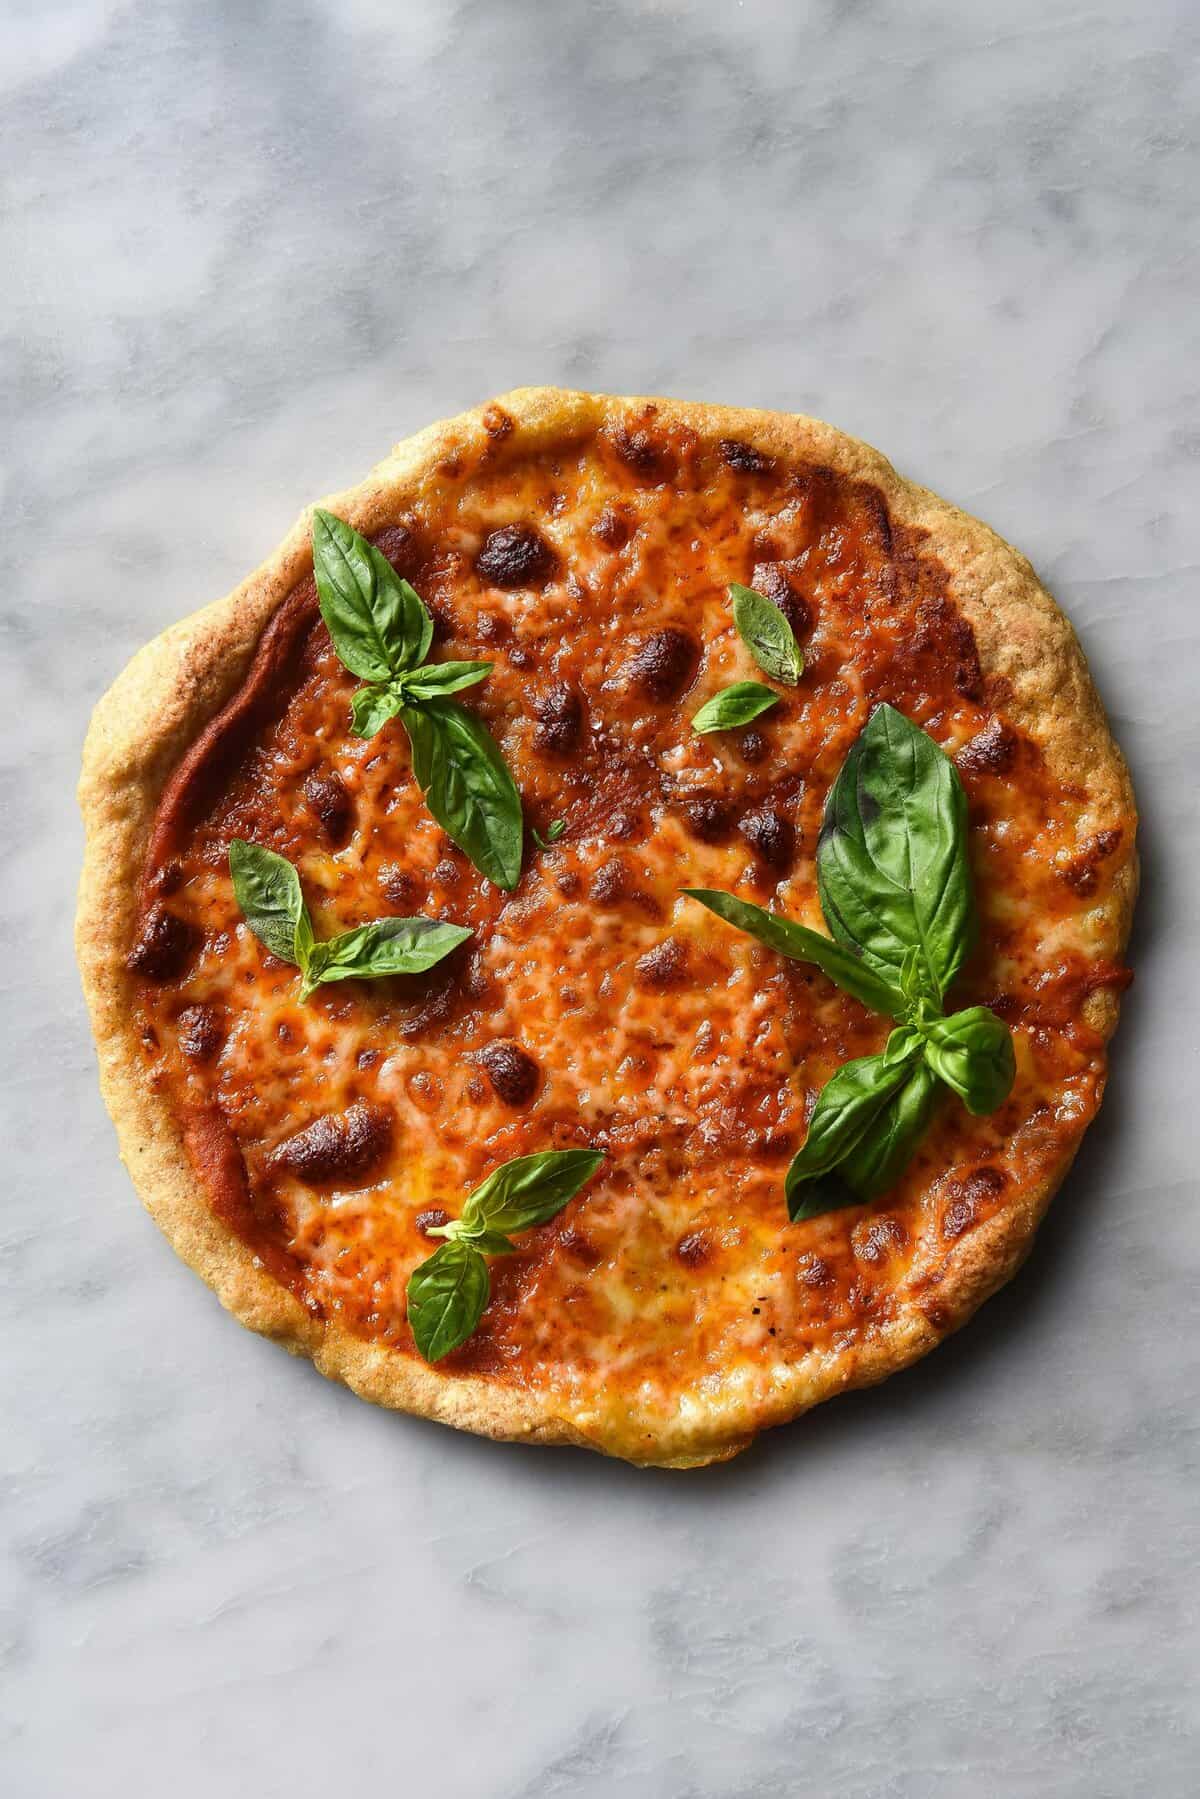 Low friendly pizza sauce from www.georgeats.com. Gluten free, nut free and vegetarian (vegan adaptable).